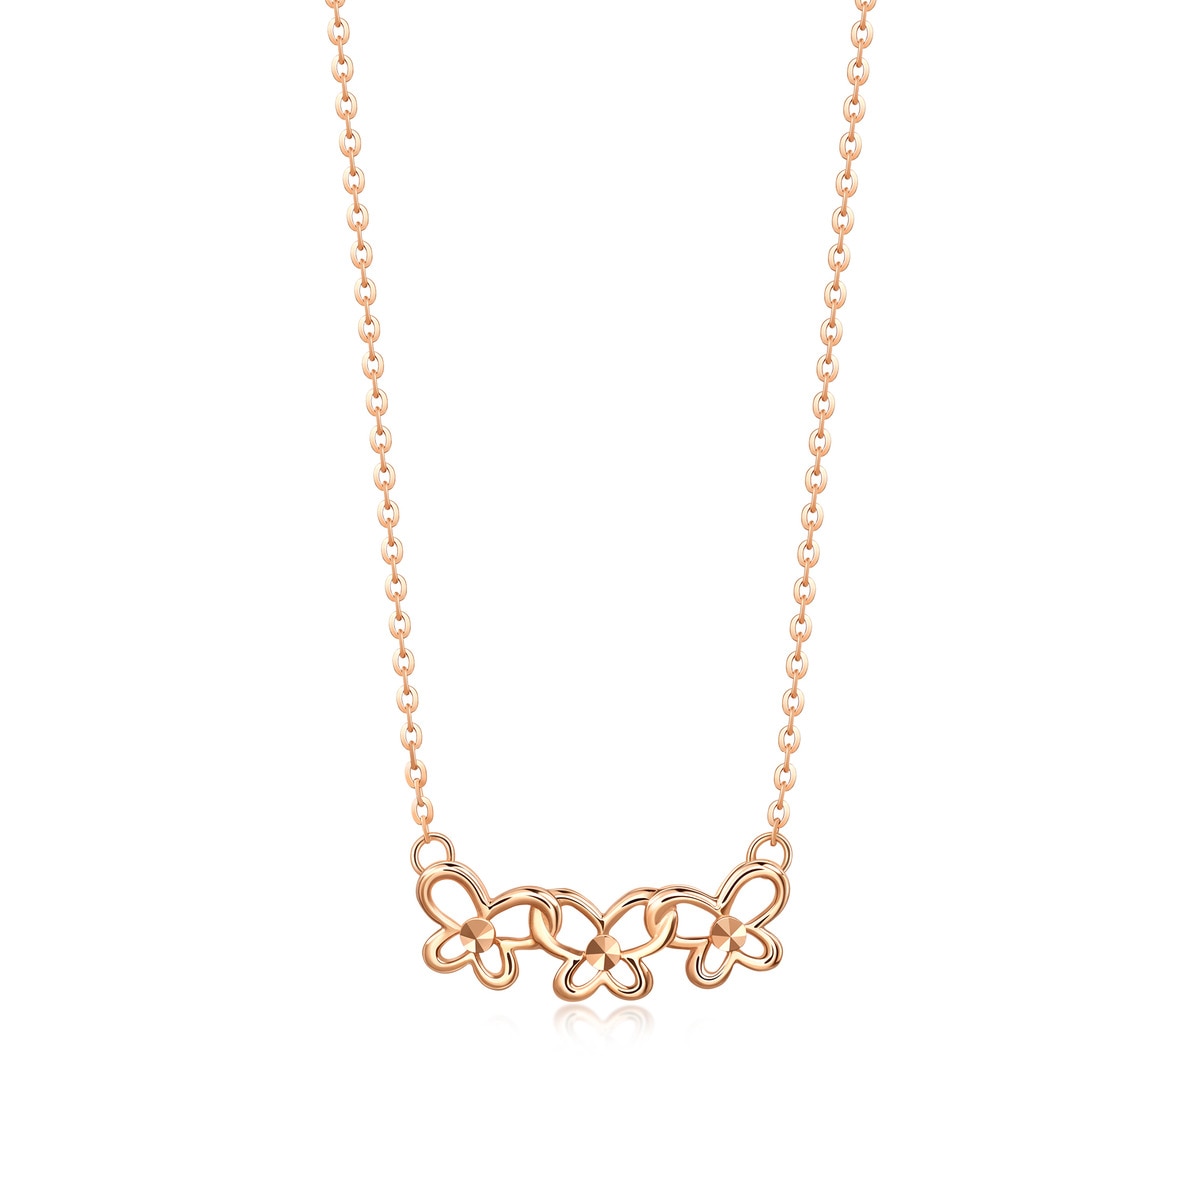 Minty Collection 18K Rose Gold Necklace - 92259N | Chow Sang Sang Jewellery